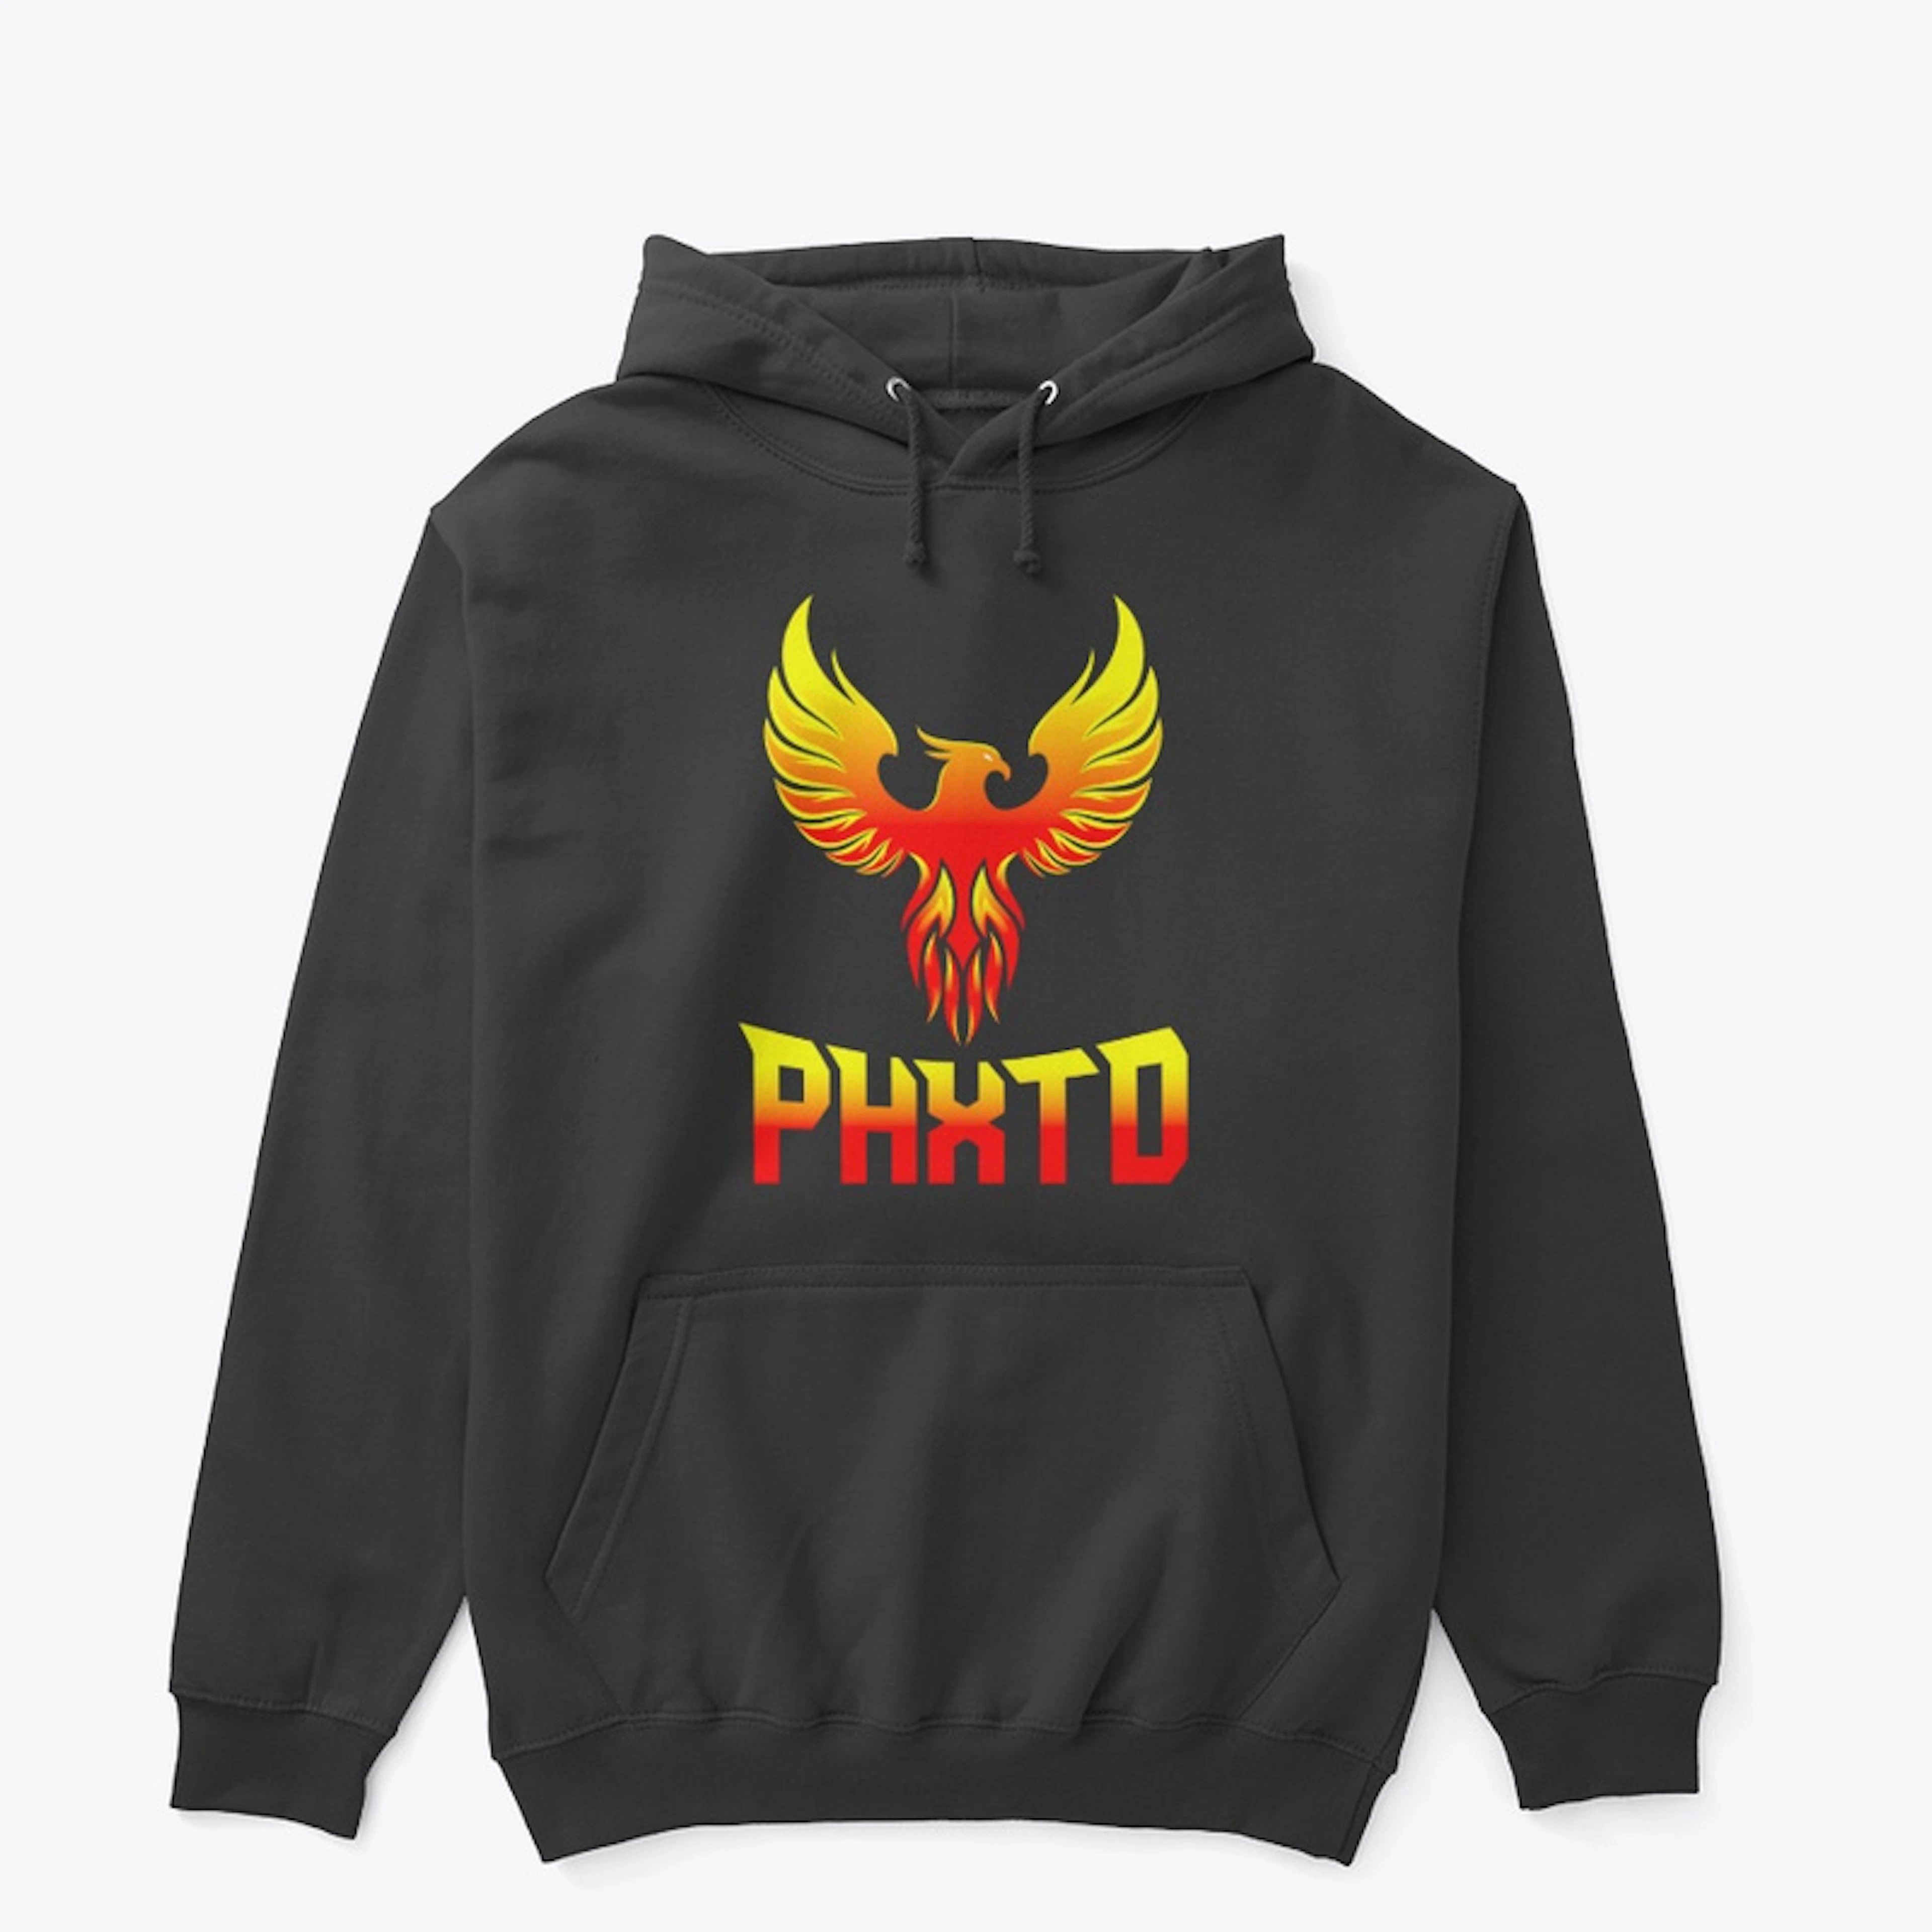 PHXTD ON FIRE - Pullover Hoodie